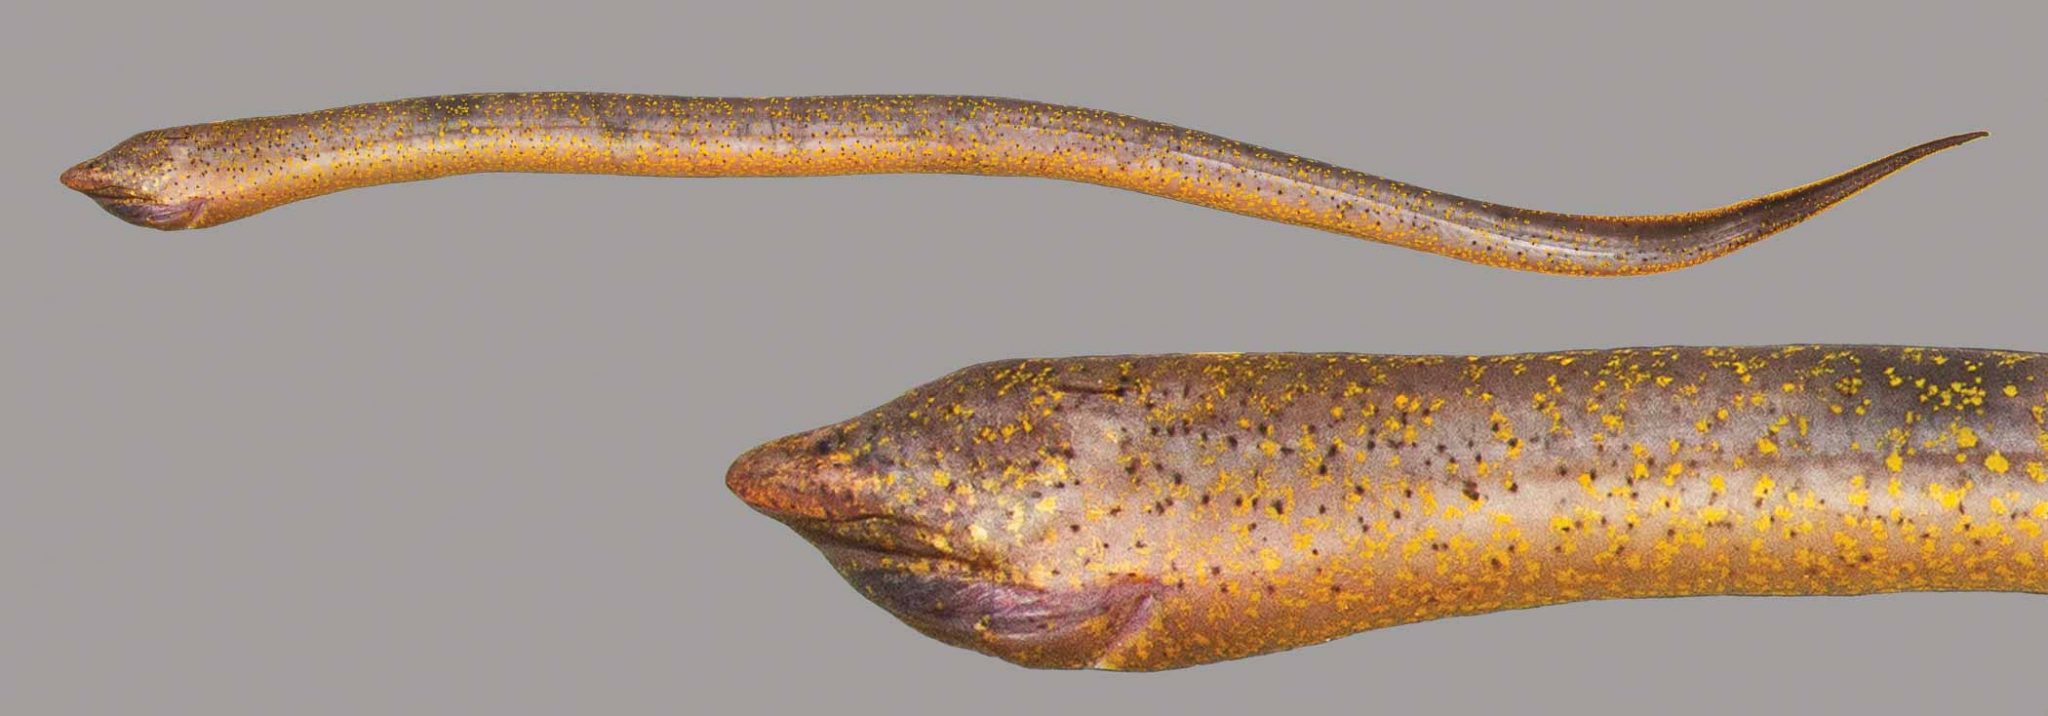 Asian Swamp Eel Discover Fishes